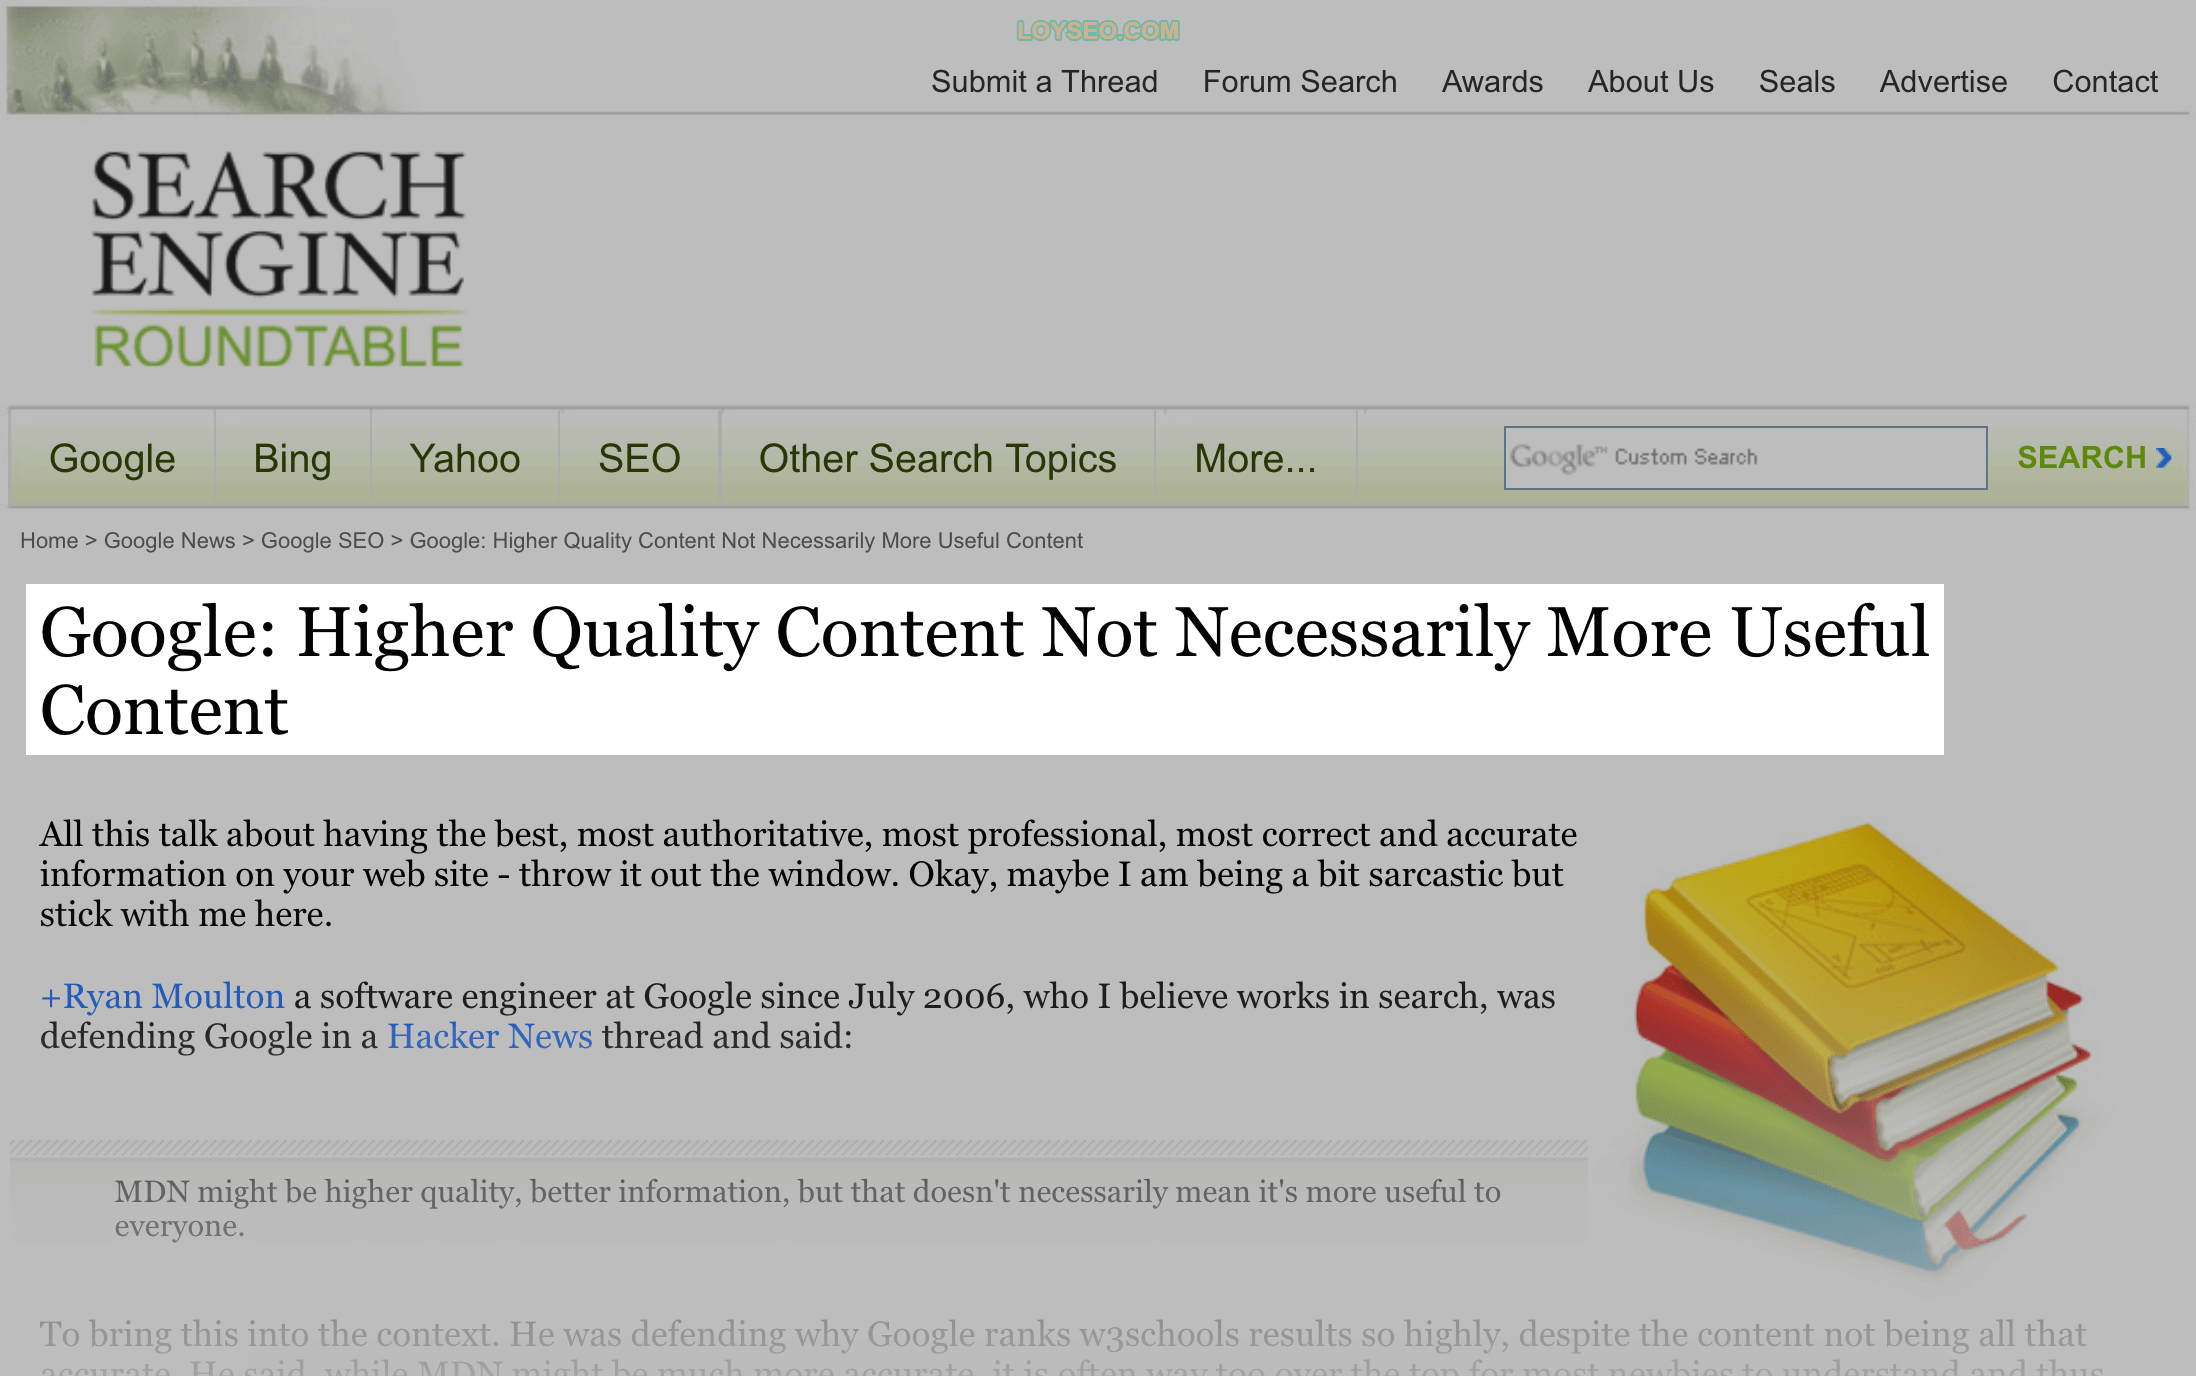 Distinction between higher-quality content and useful content